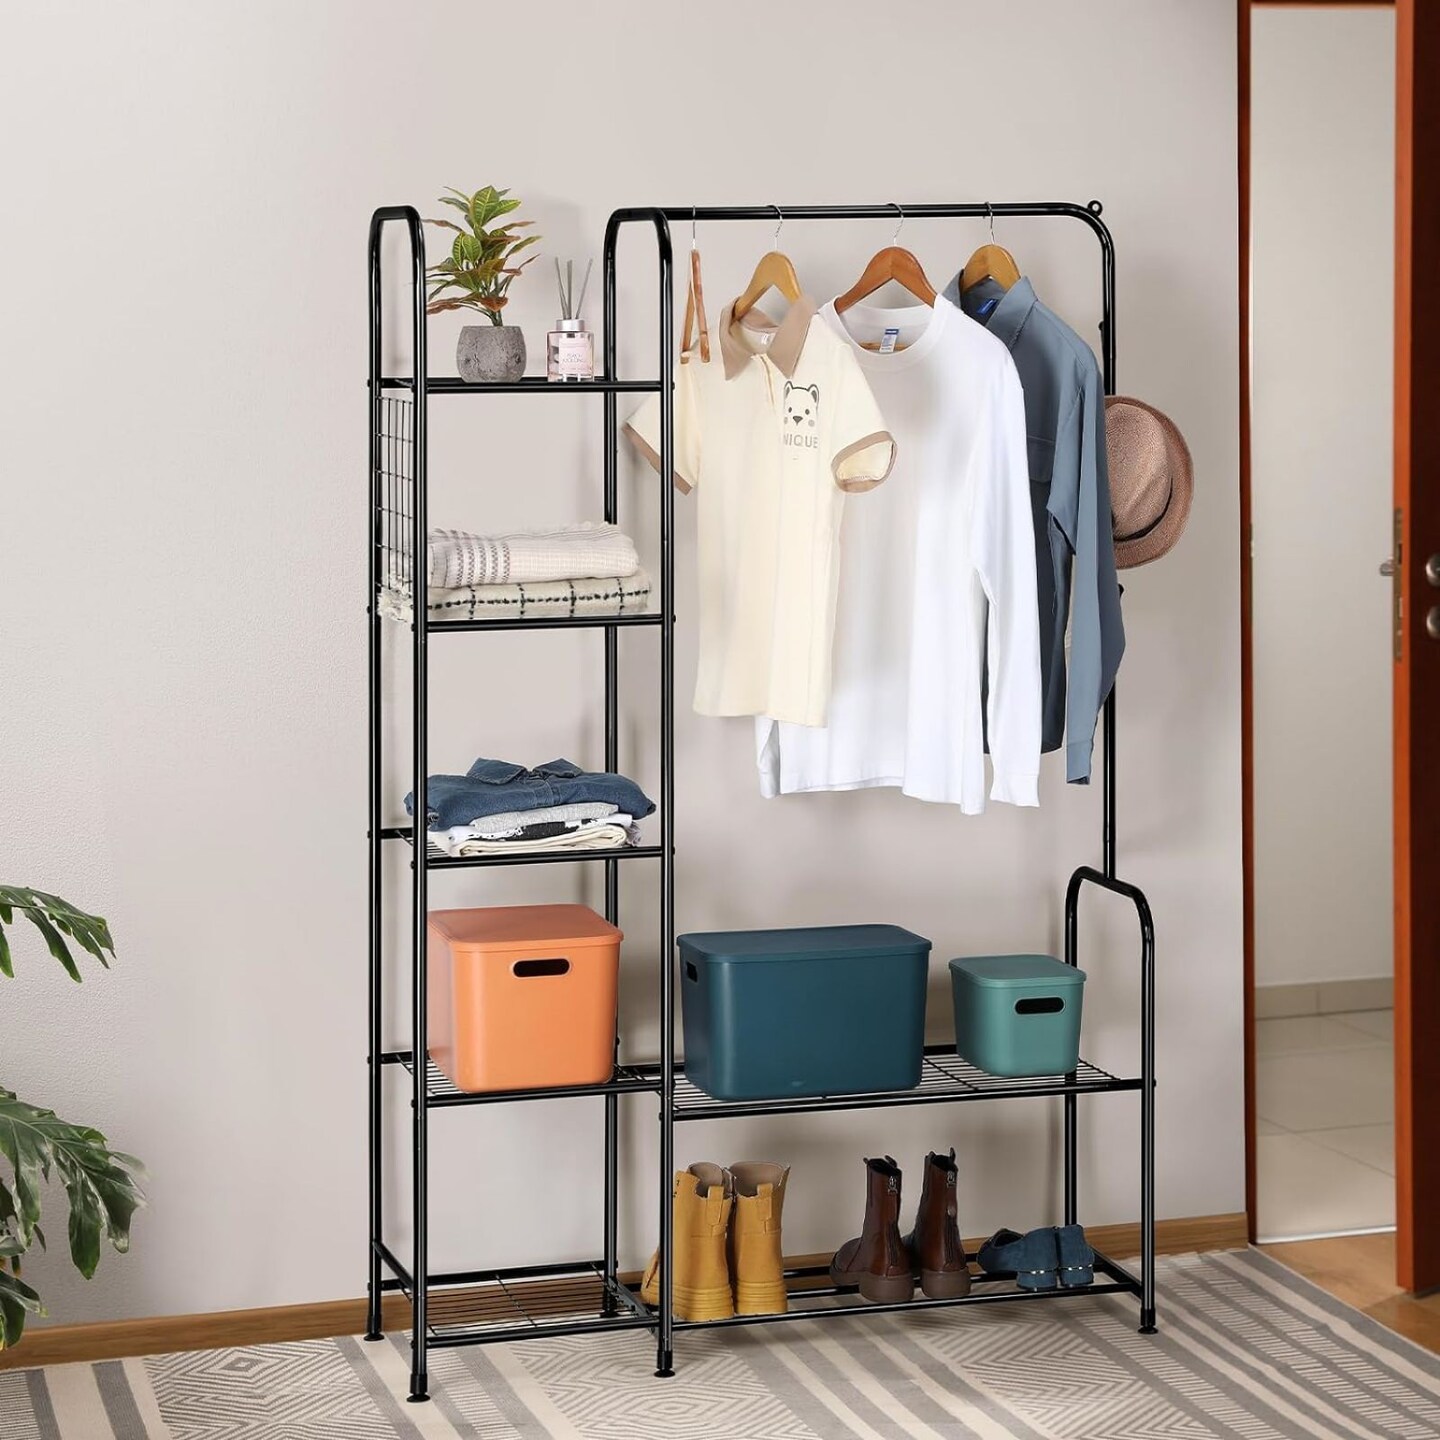 Coat Rack Freestanding Clothing Rack with Shelves Garment Racks for Hanging Clothes with Shoe Rack